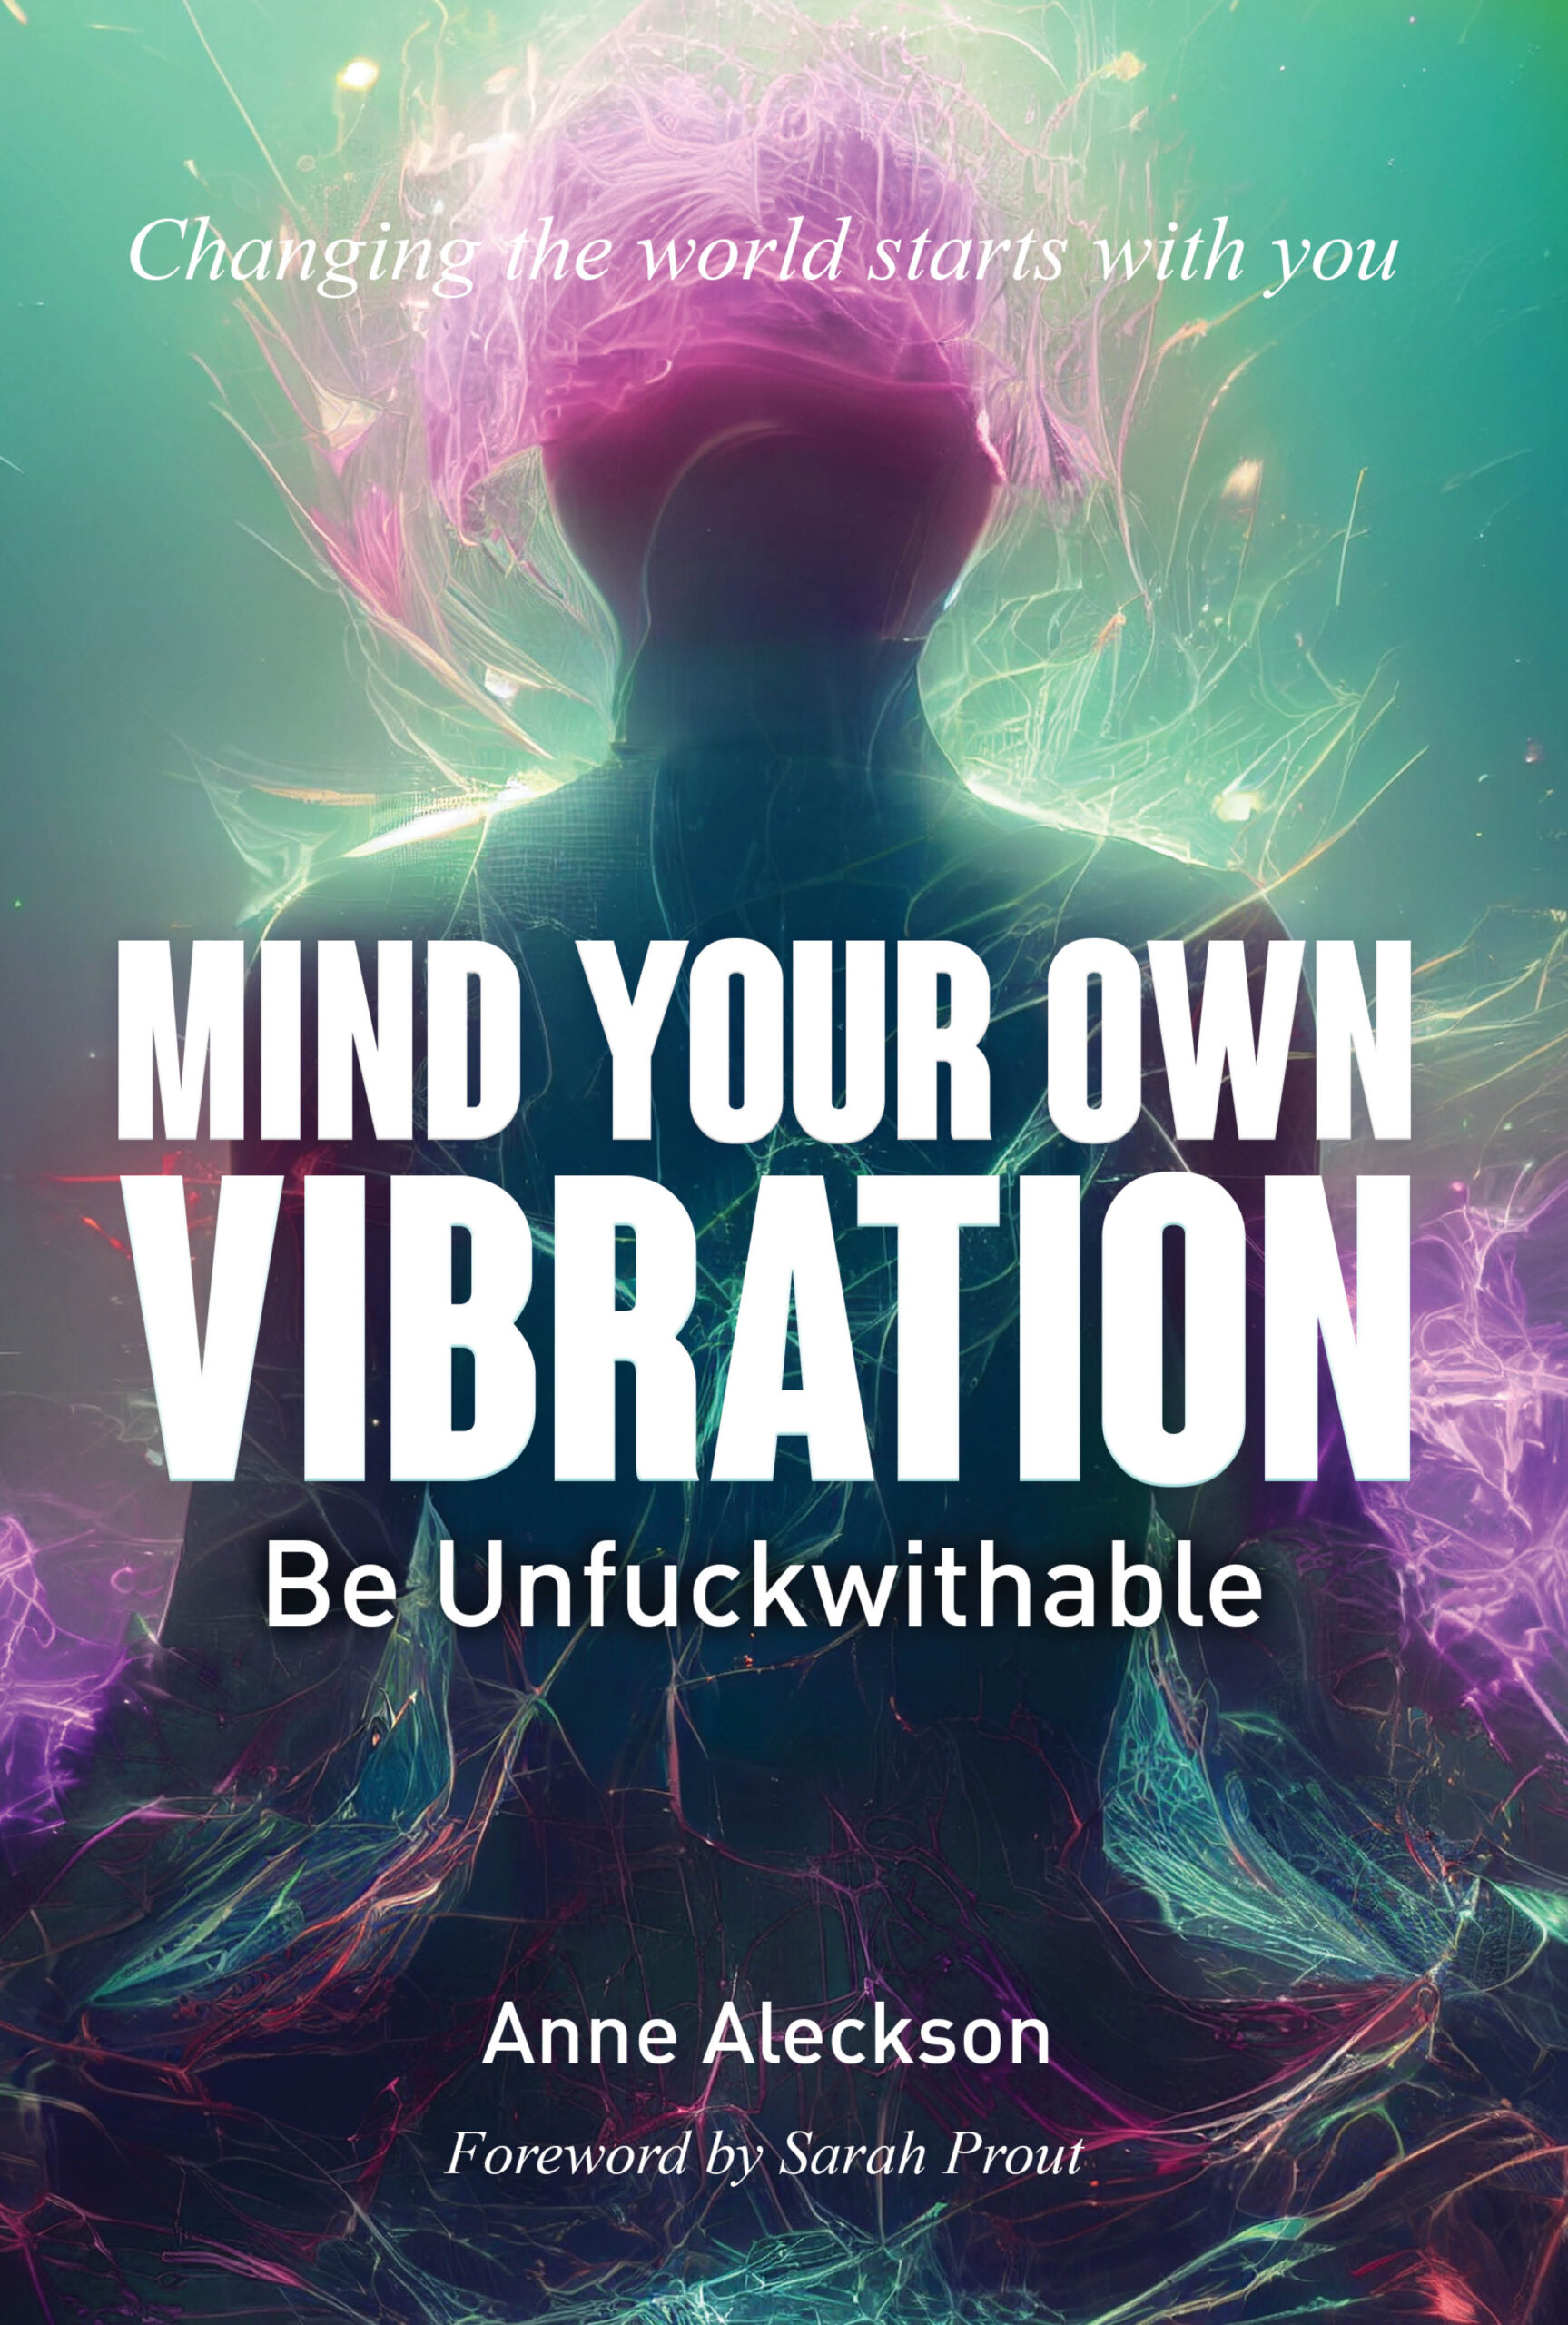 MIND YOUR OWN VIBRATION